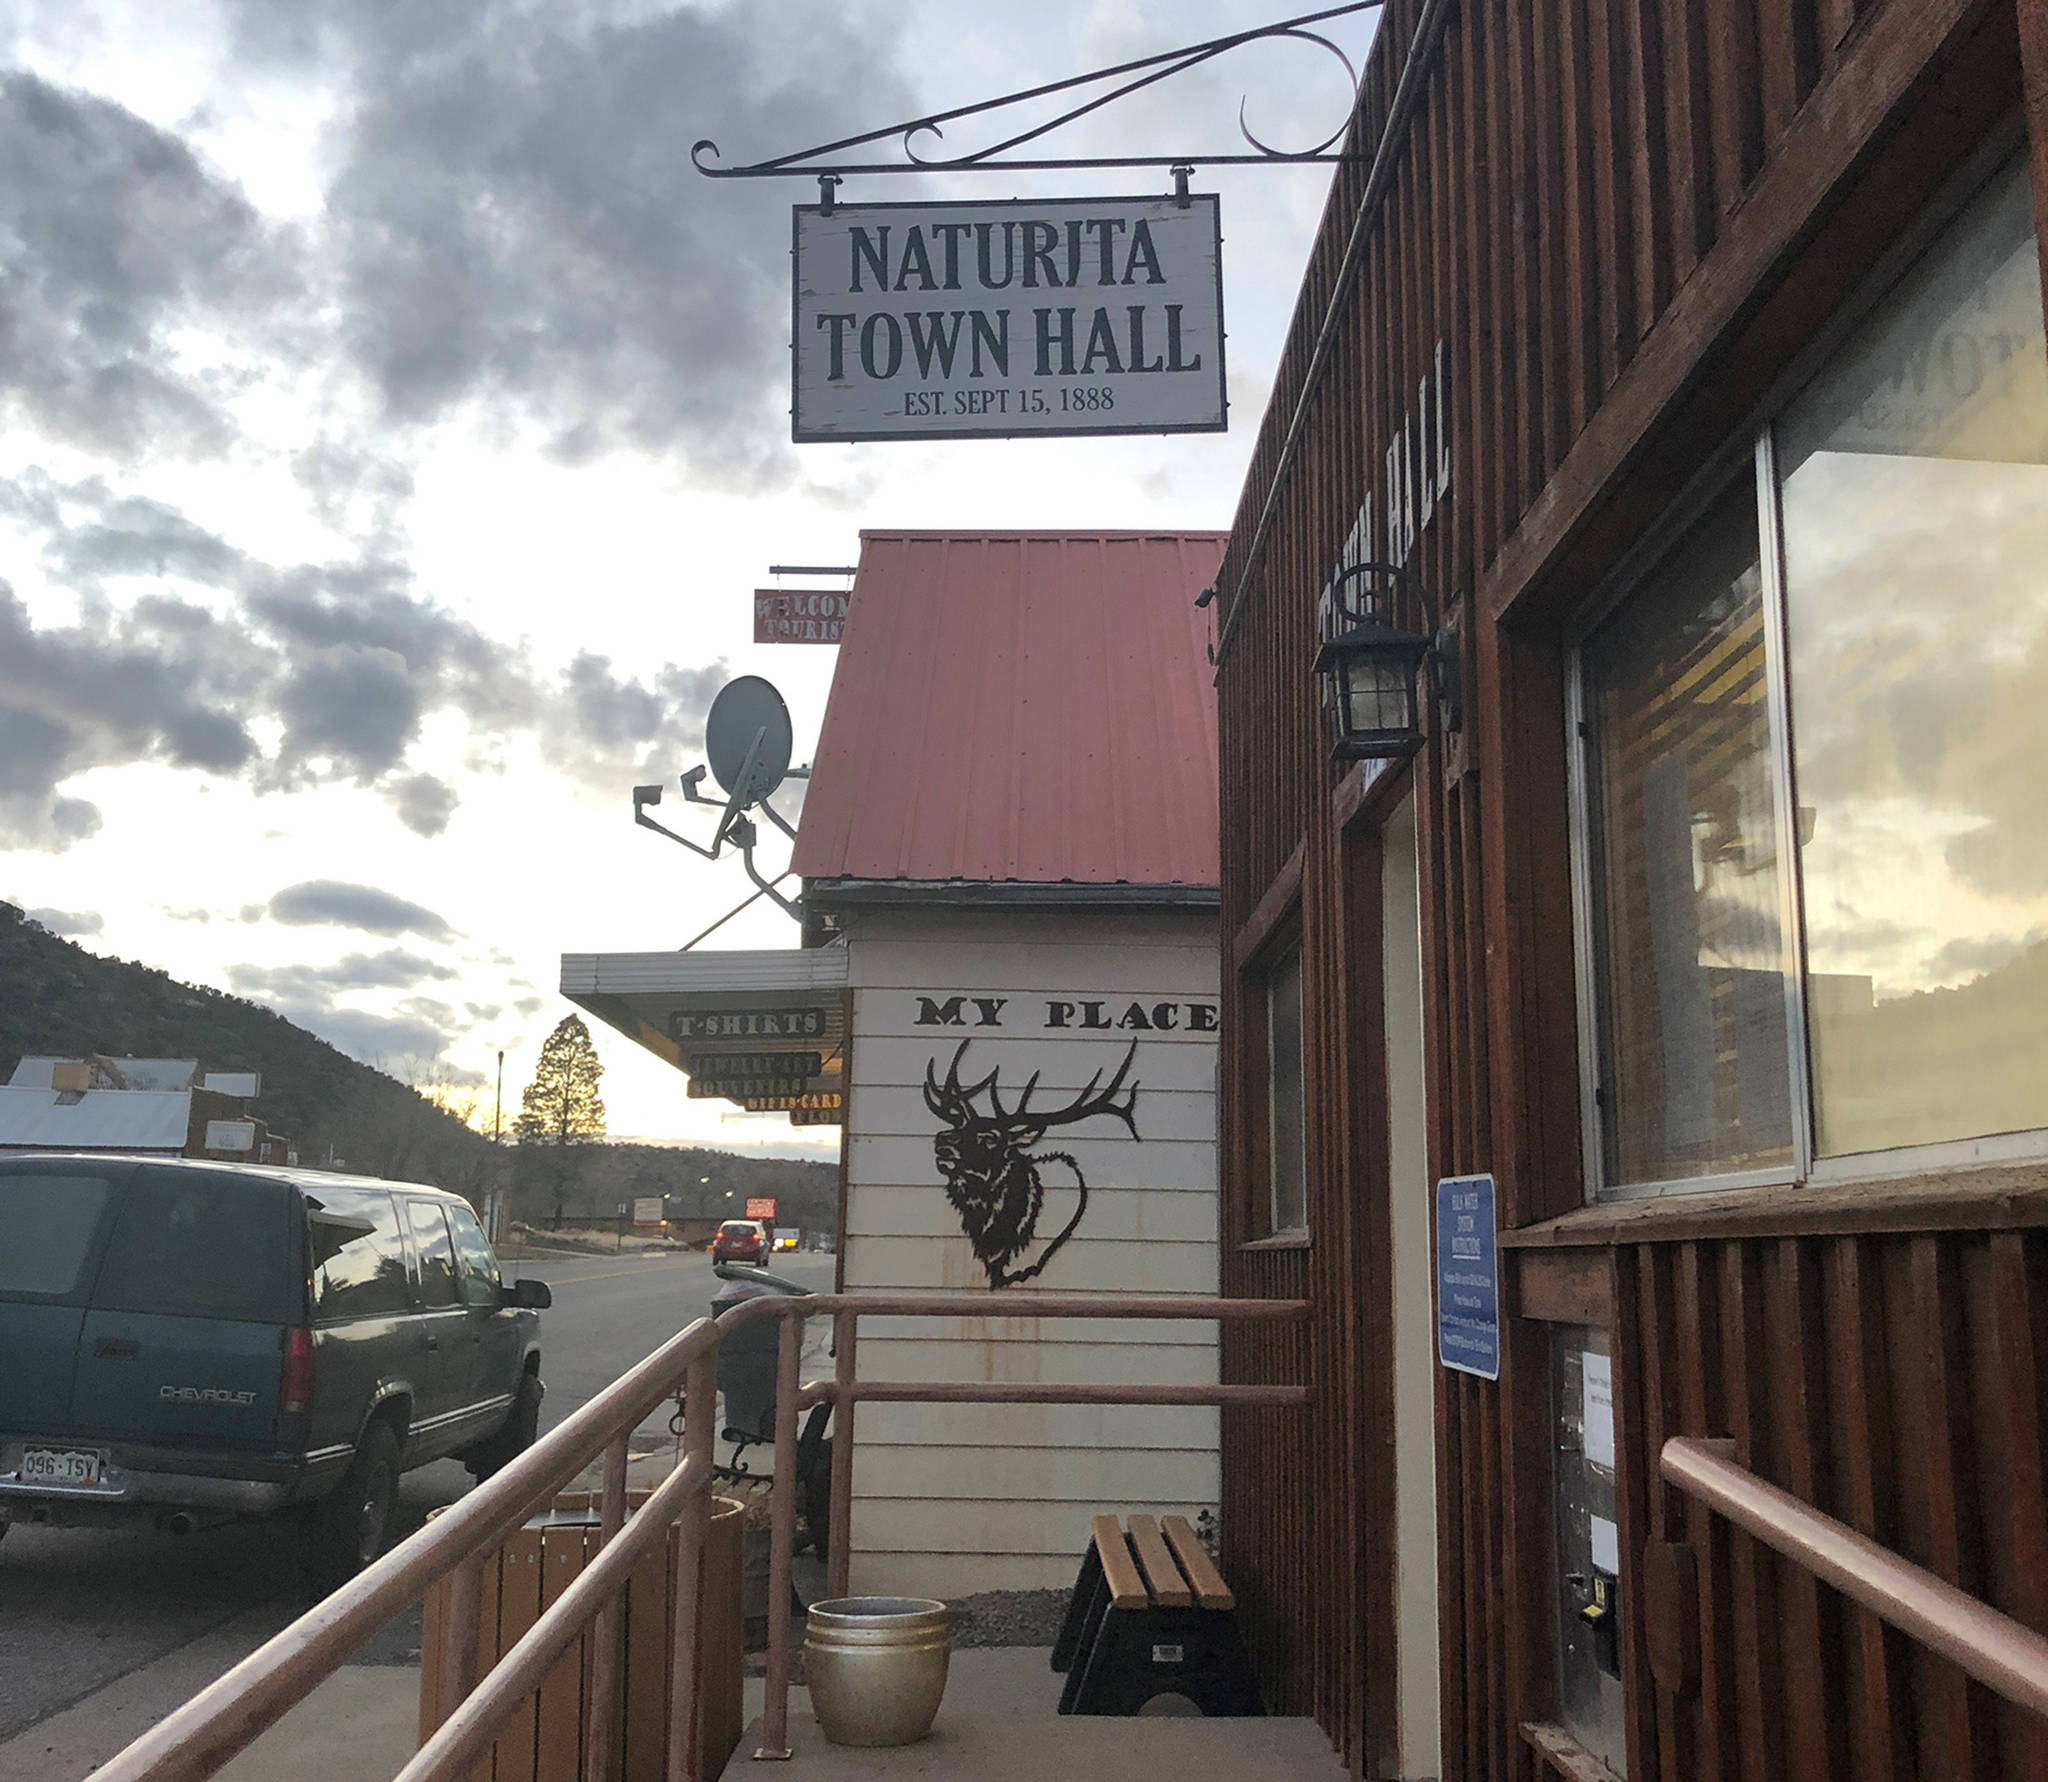 (Courtesy of Natalie Binder) Naturita is one of the towns in rural Colorado that are eager to attract “opportunity zone” investment. Many projects will need savvy marketing and other incentives to move forward.